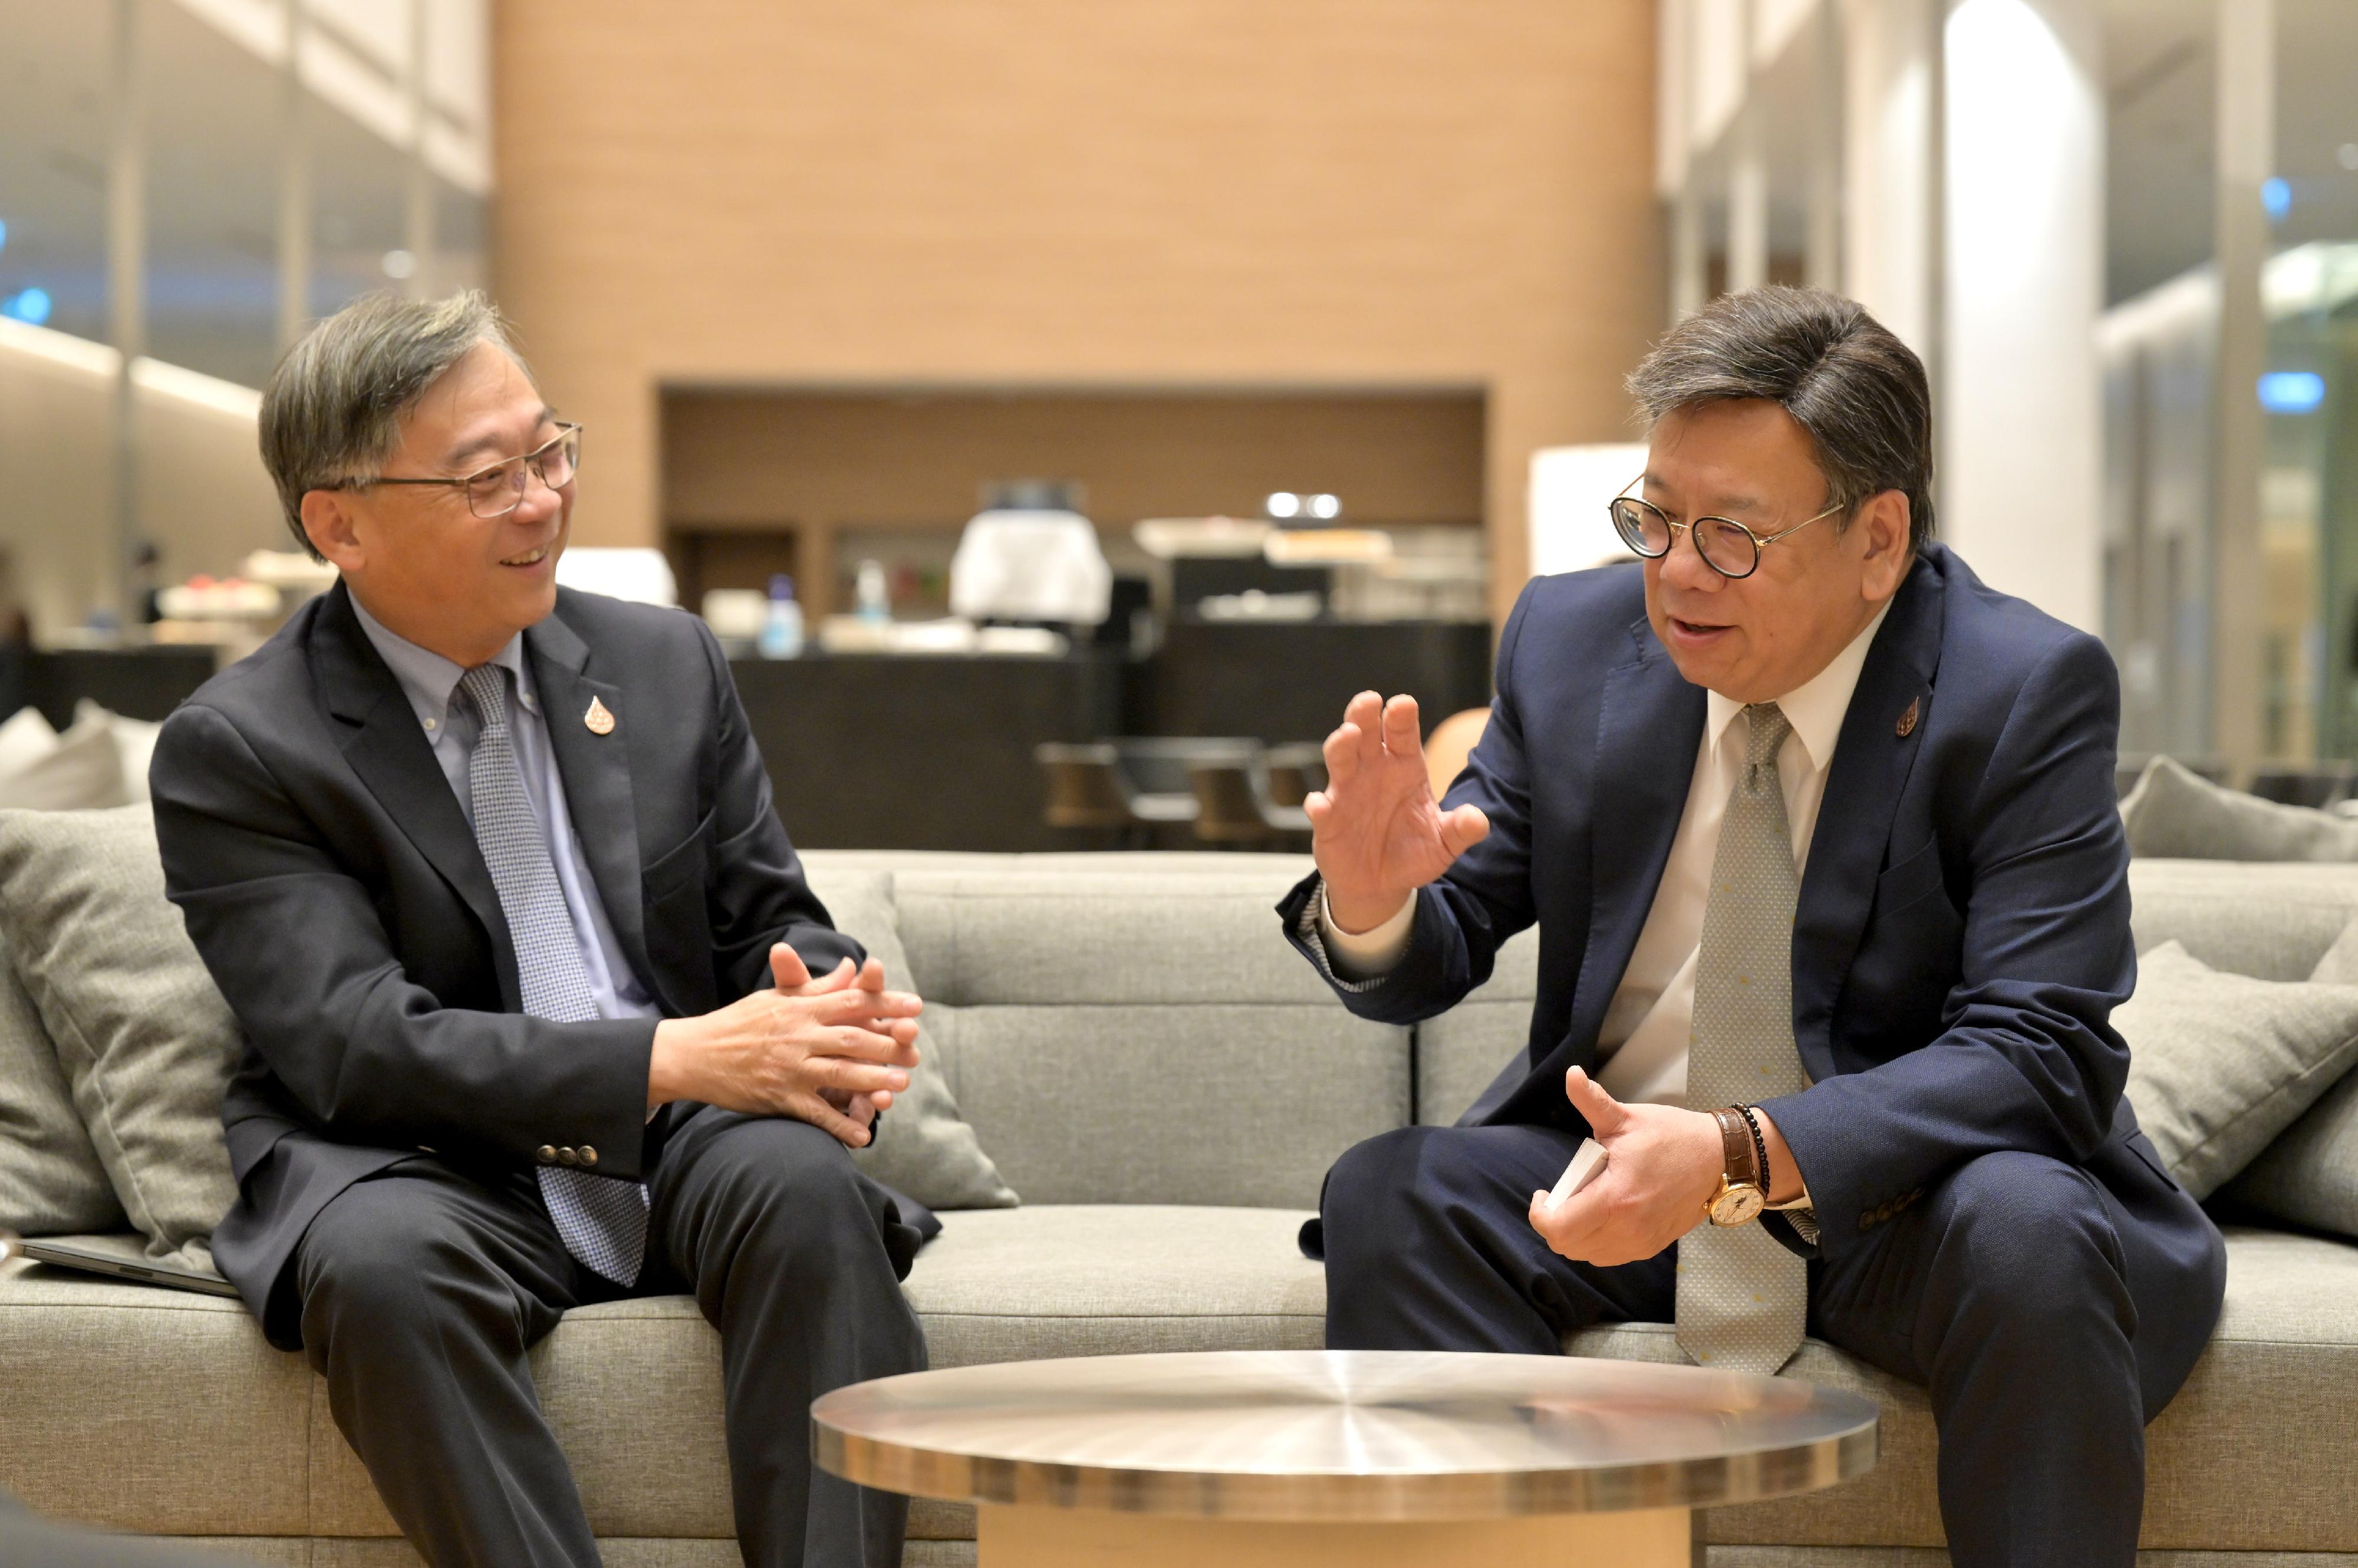 The Secretary for Commerce and Economic Development, Mr Algernon Yau, attended the 33rd Asia-Pacific Economic Cooperation Ministerial Meeting in Bangkok, Thailand, today (November 17). Photo shows Mr Yau (right) meeting with the Minister for Trade and Industry of Singapore, Mr Gan Kim Yong (left), to discuss various trade and economic issues after his arrival yesterday (November 16).